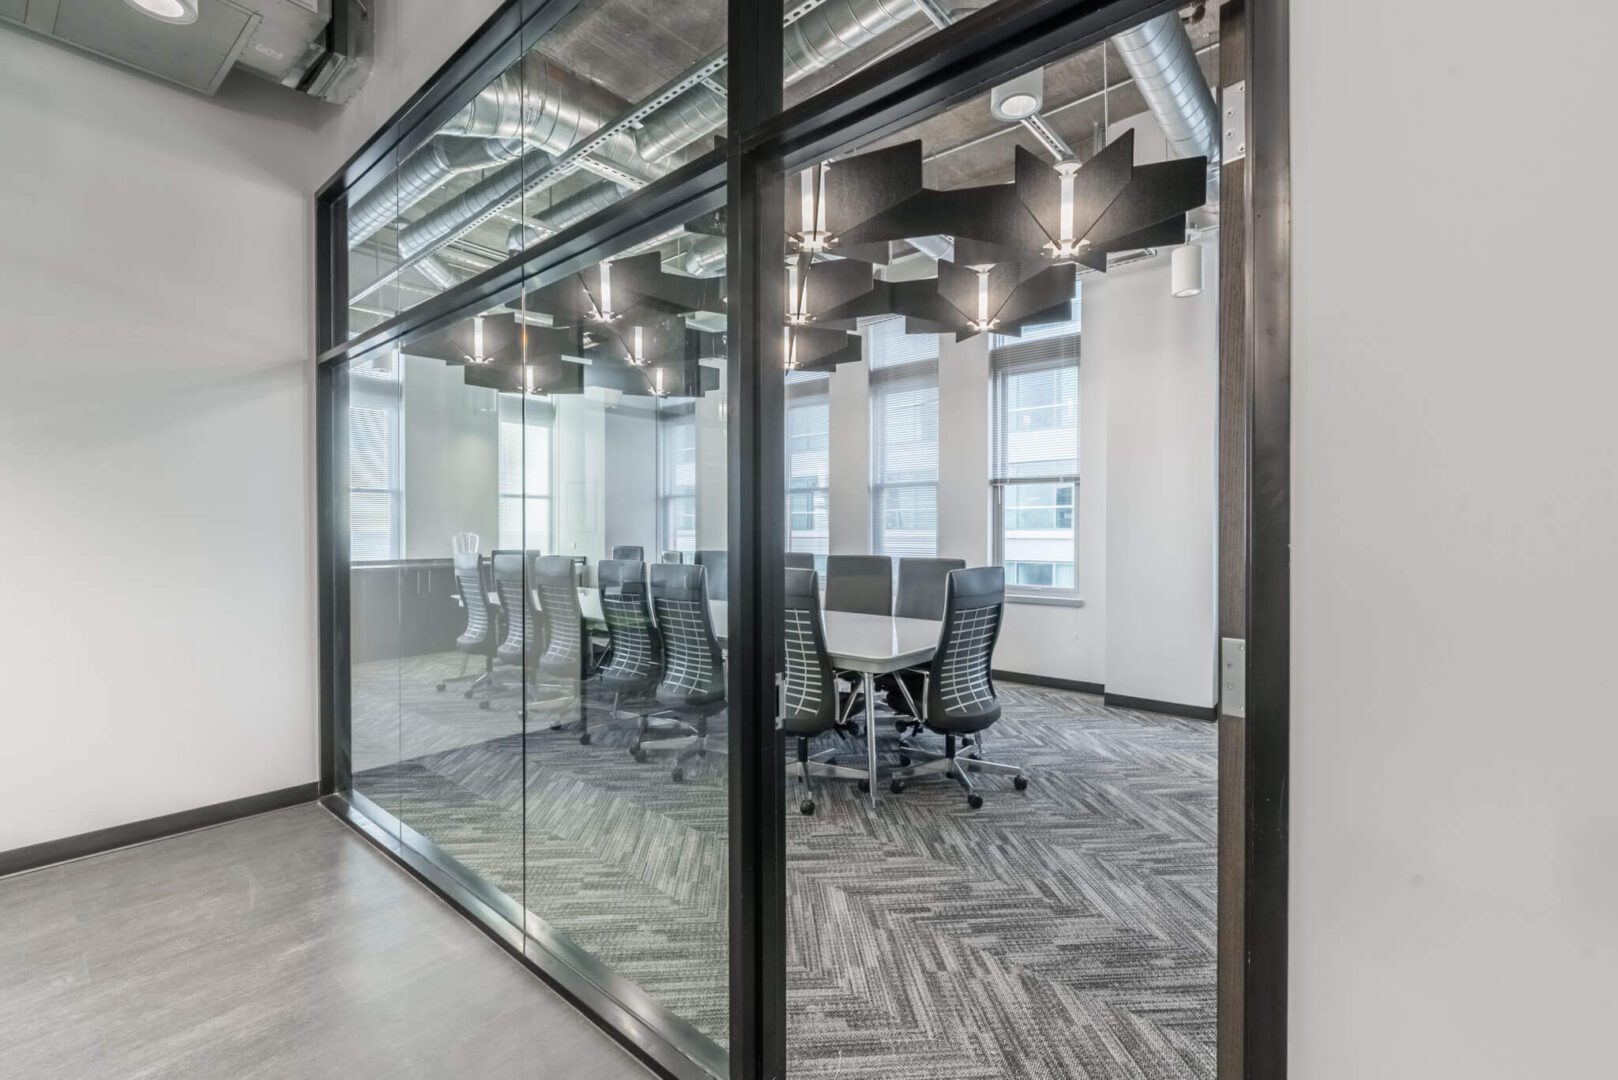 A conference room with glass walls and black chairs.